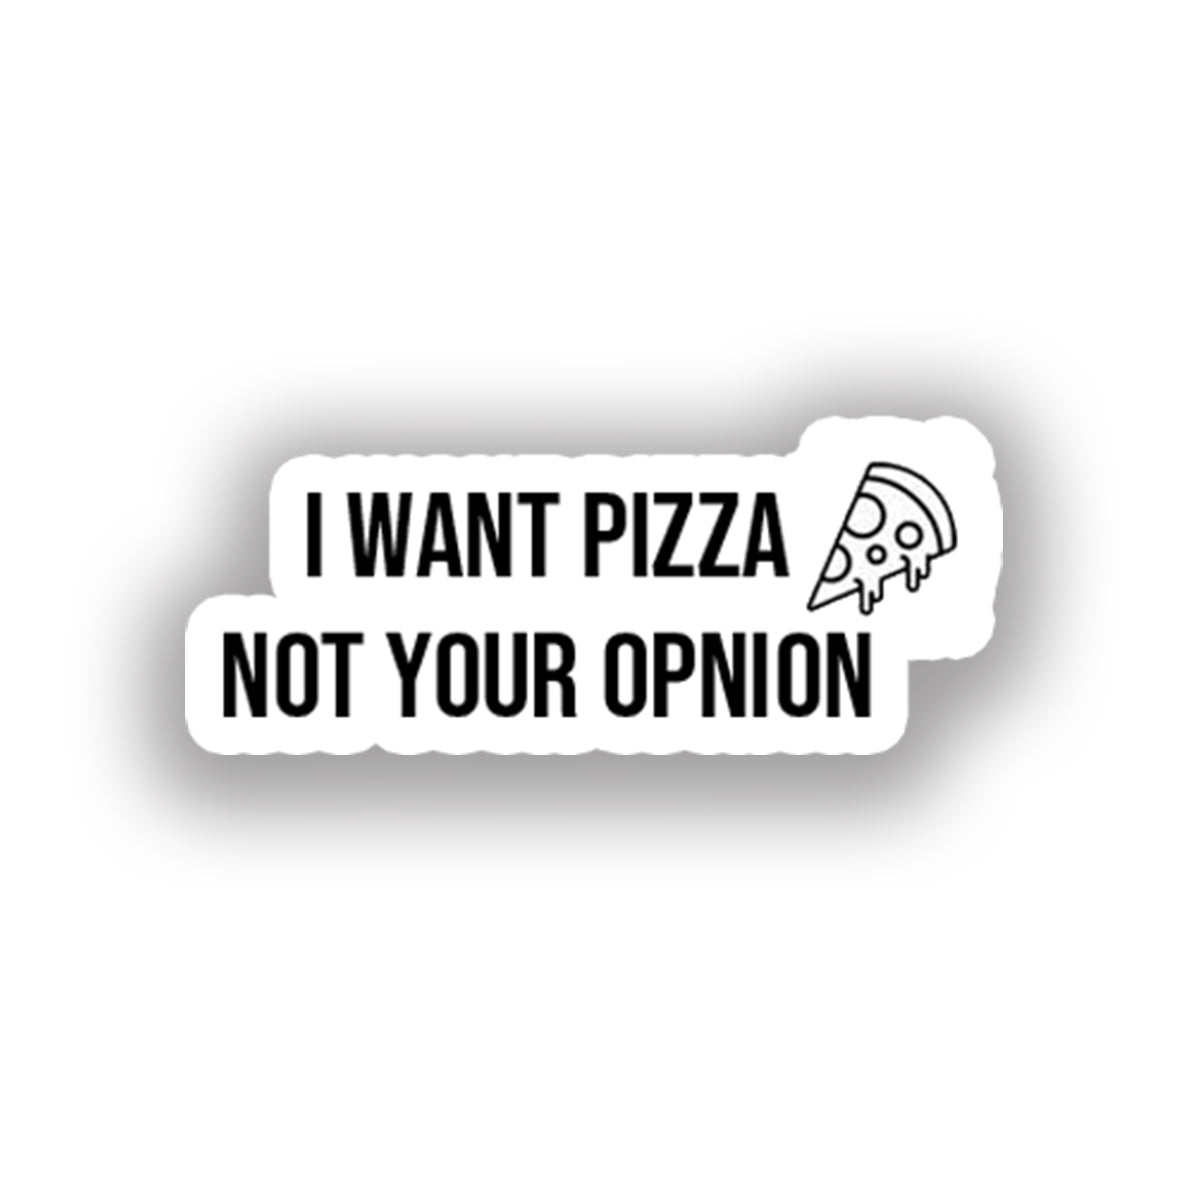 I want pizza not your opnion